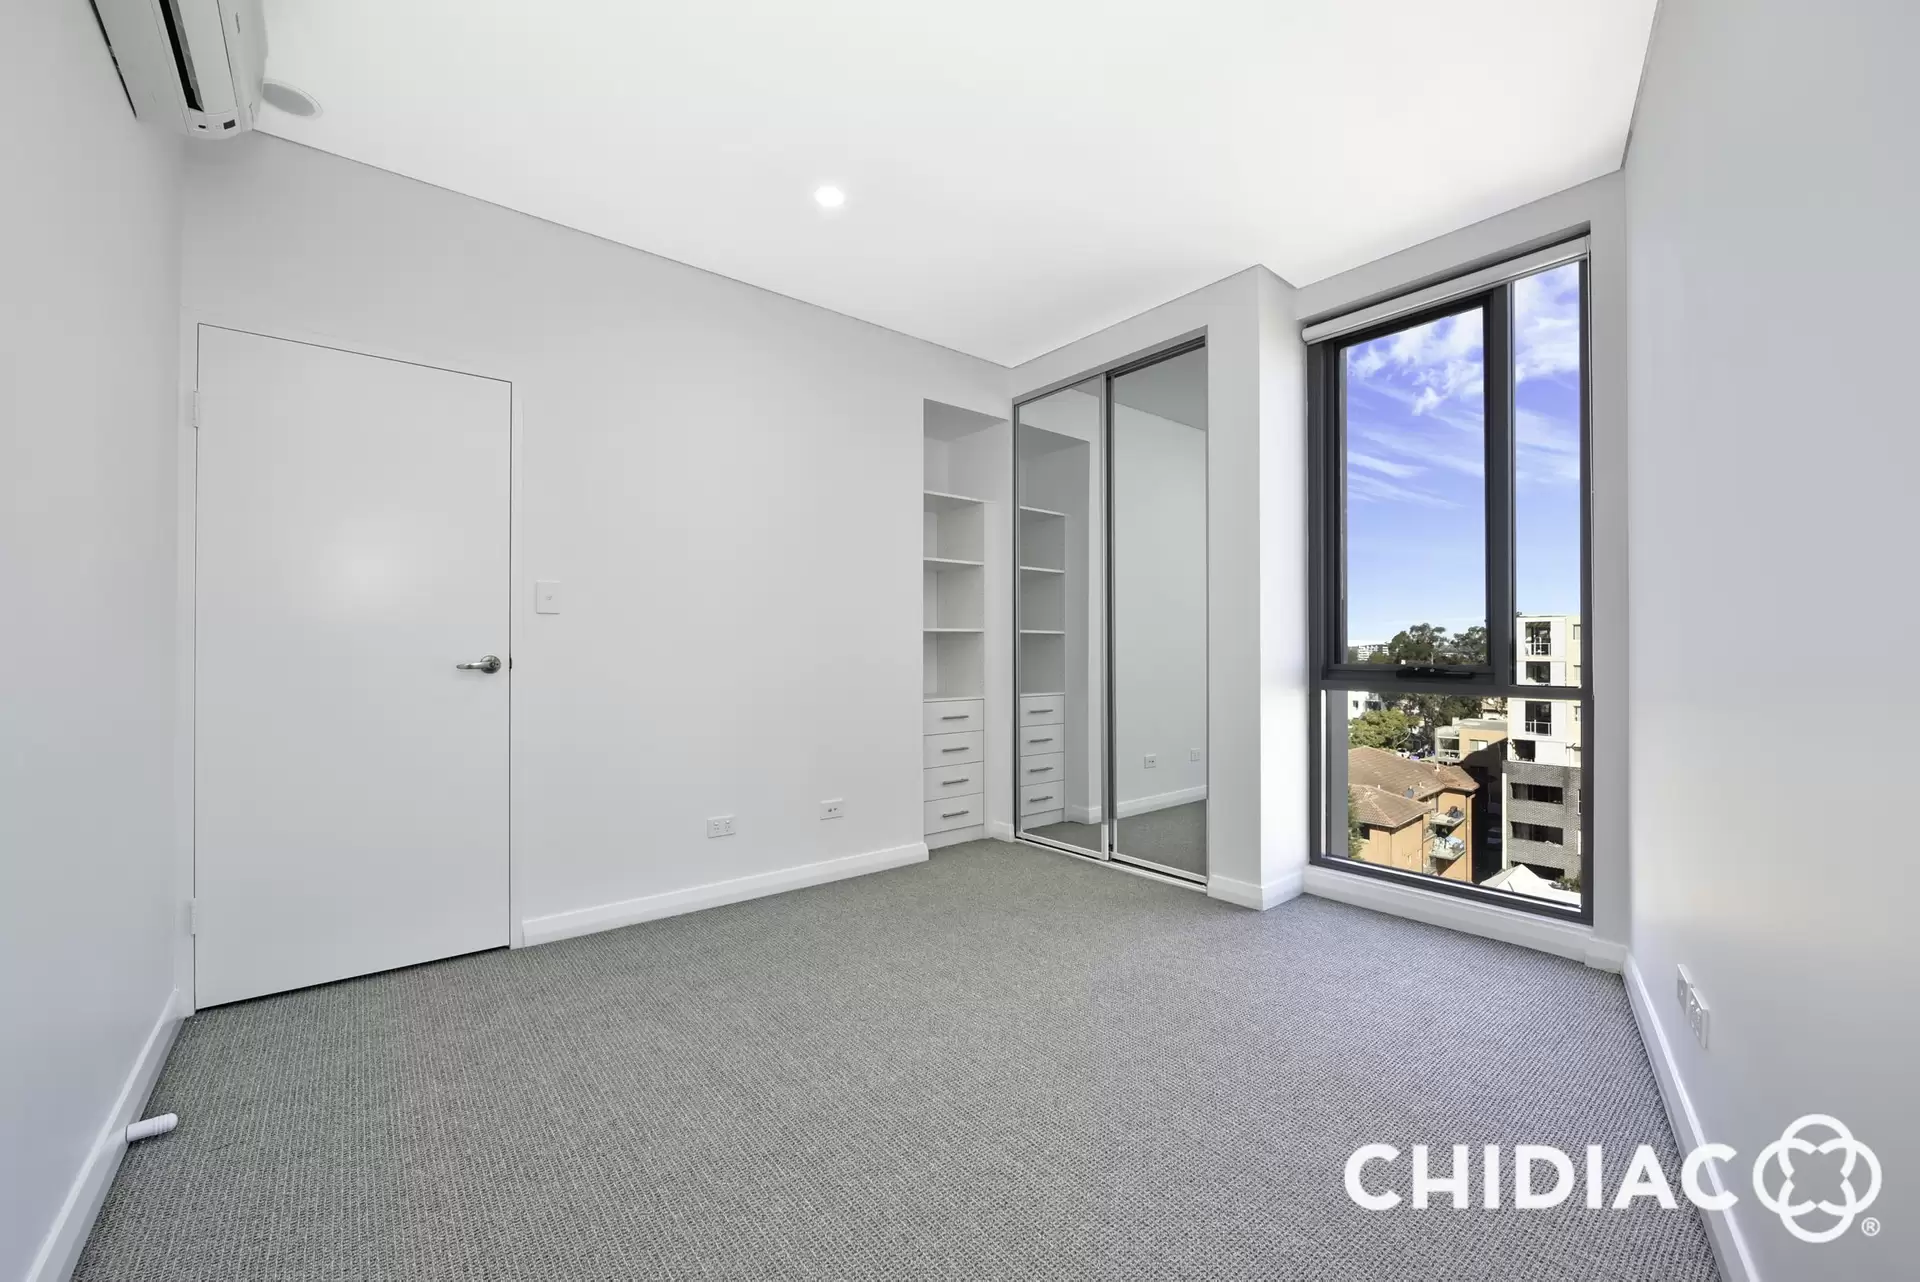 403/26 Marion Street, Parramatta Leased by Chidiac Realty - image 1